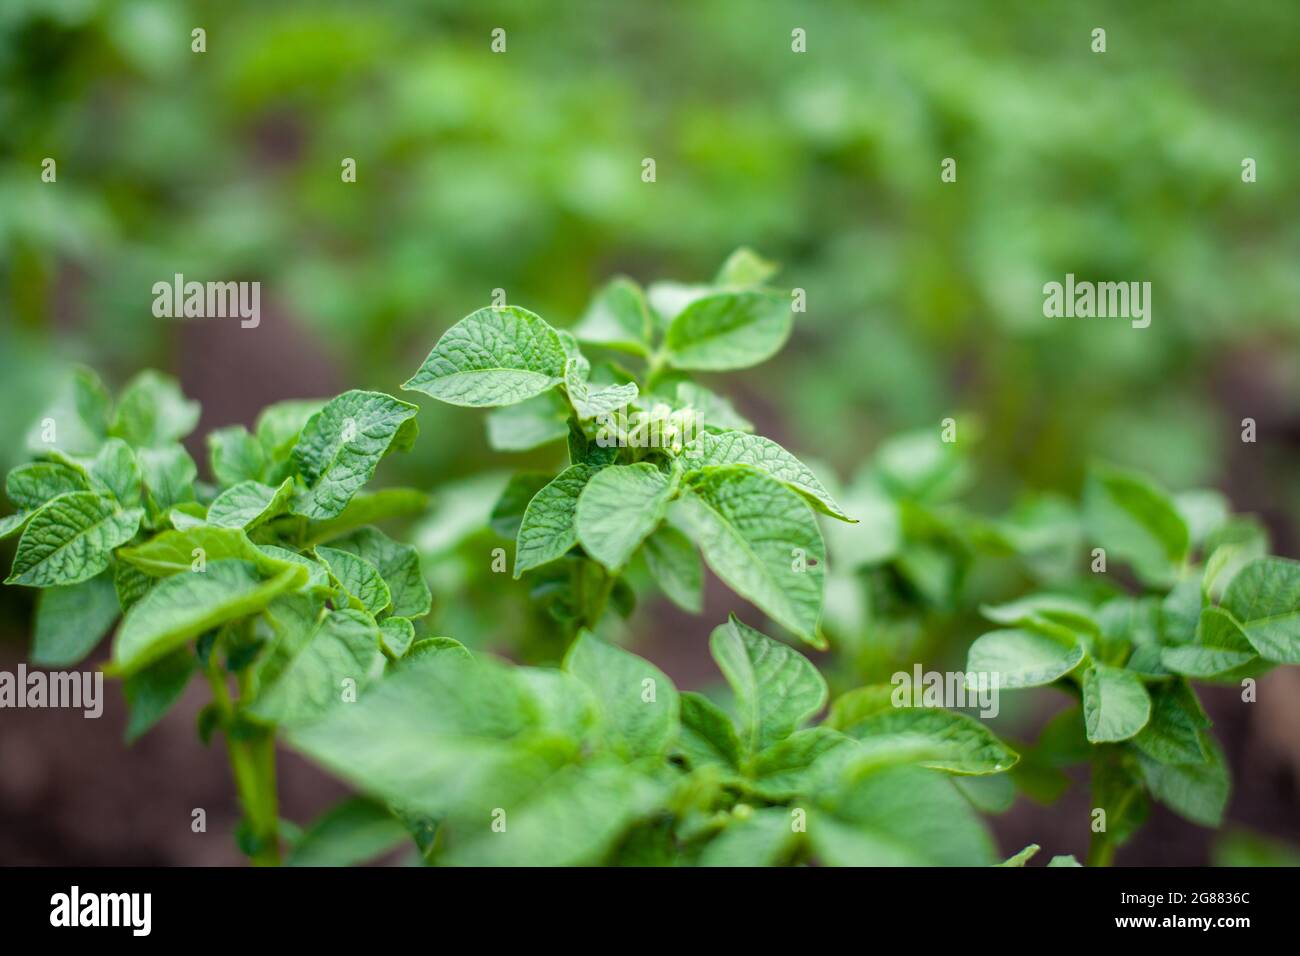 Rows of potatoes in the home garden. Preparation for harvesting. potato plants in rows on a kitchengarden farm springtime with sunshine. Green field o Stock Photo